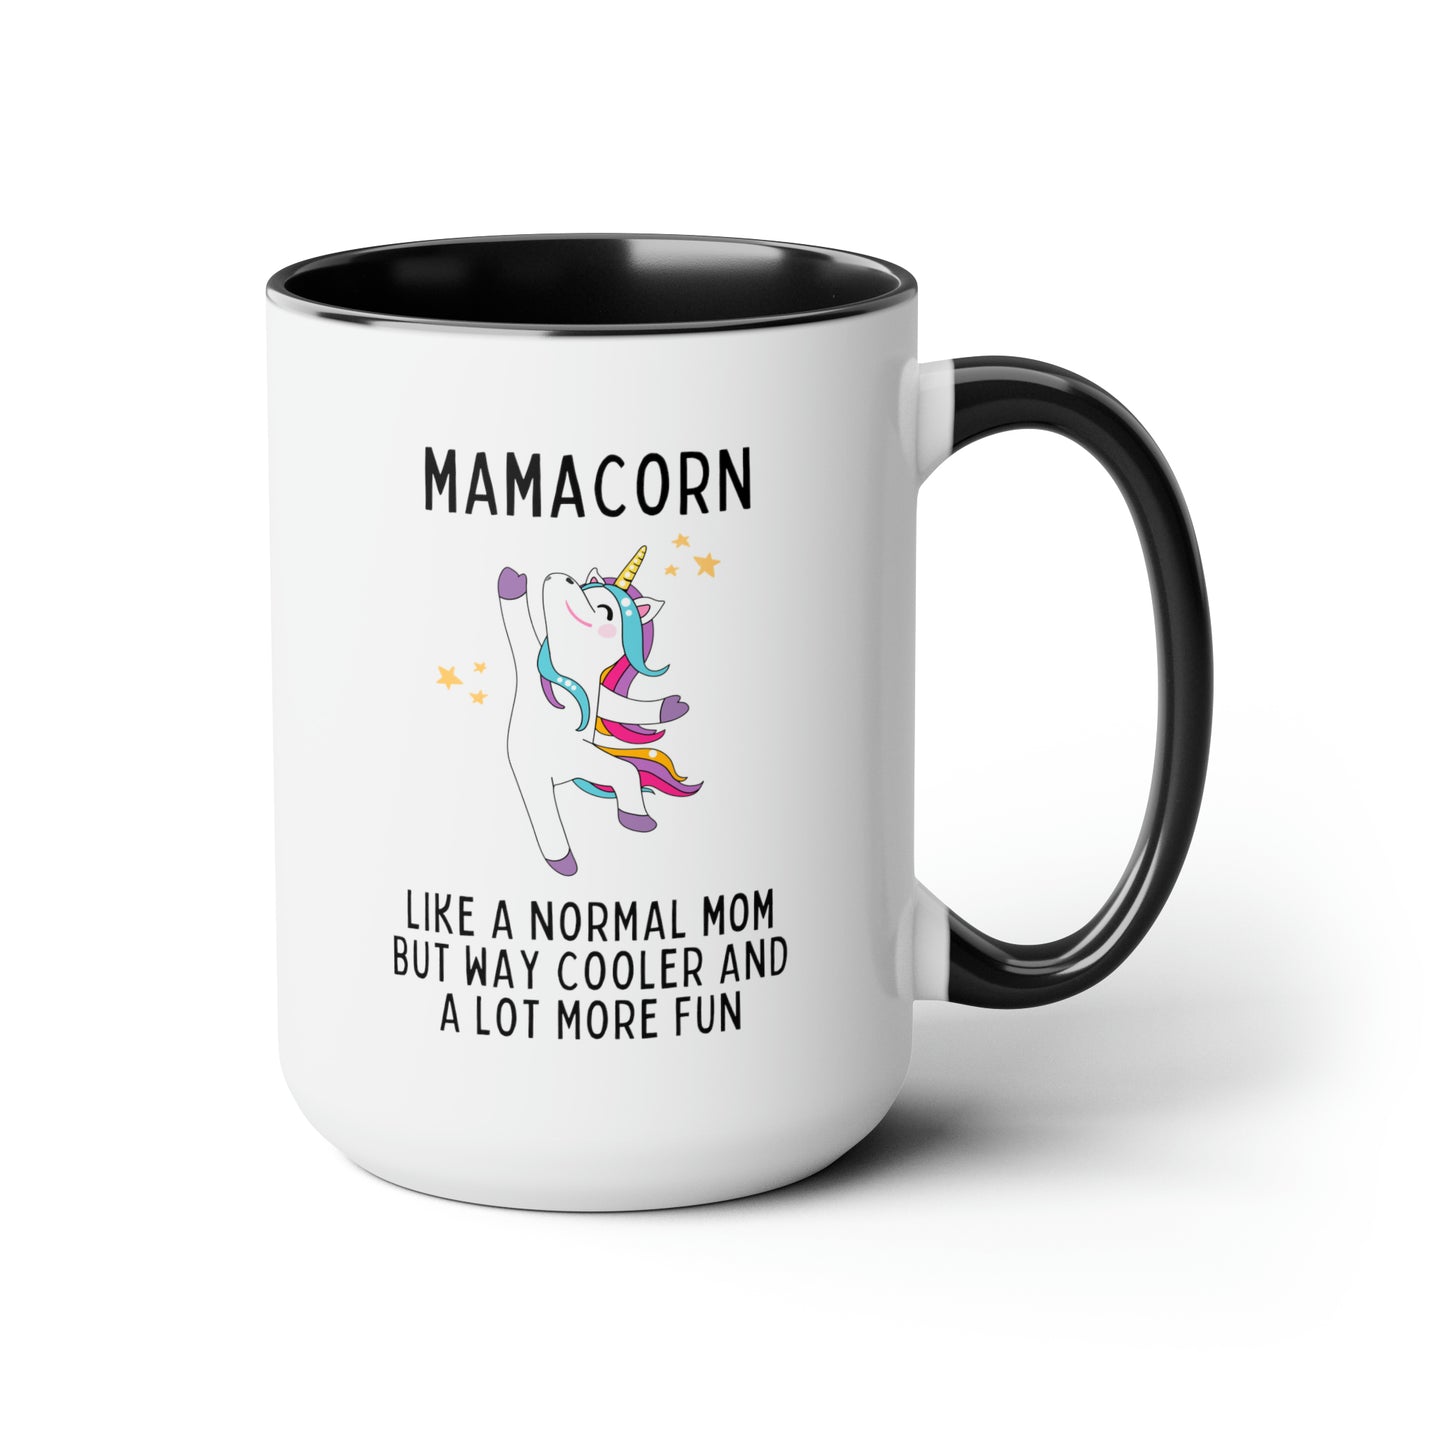 Mamacorn Like A Normal Mom But Way Cooler And A Lot More Fun 15oz white with a black accent funny large coffee mug gift for mom unicorn lover awesome mothers day waveywares wavey wares wavywares wavy wares